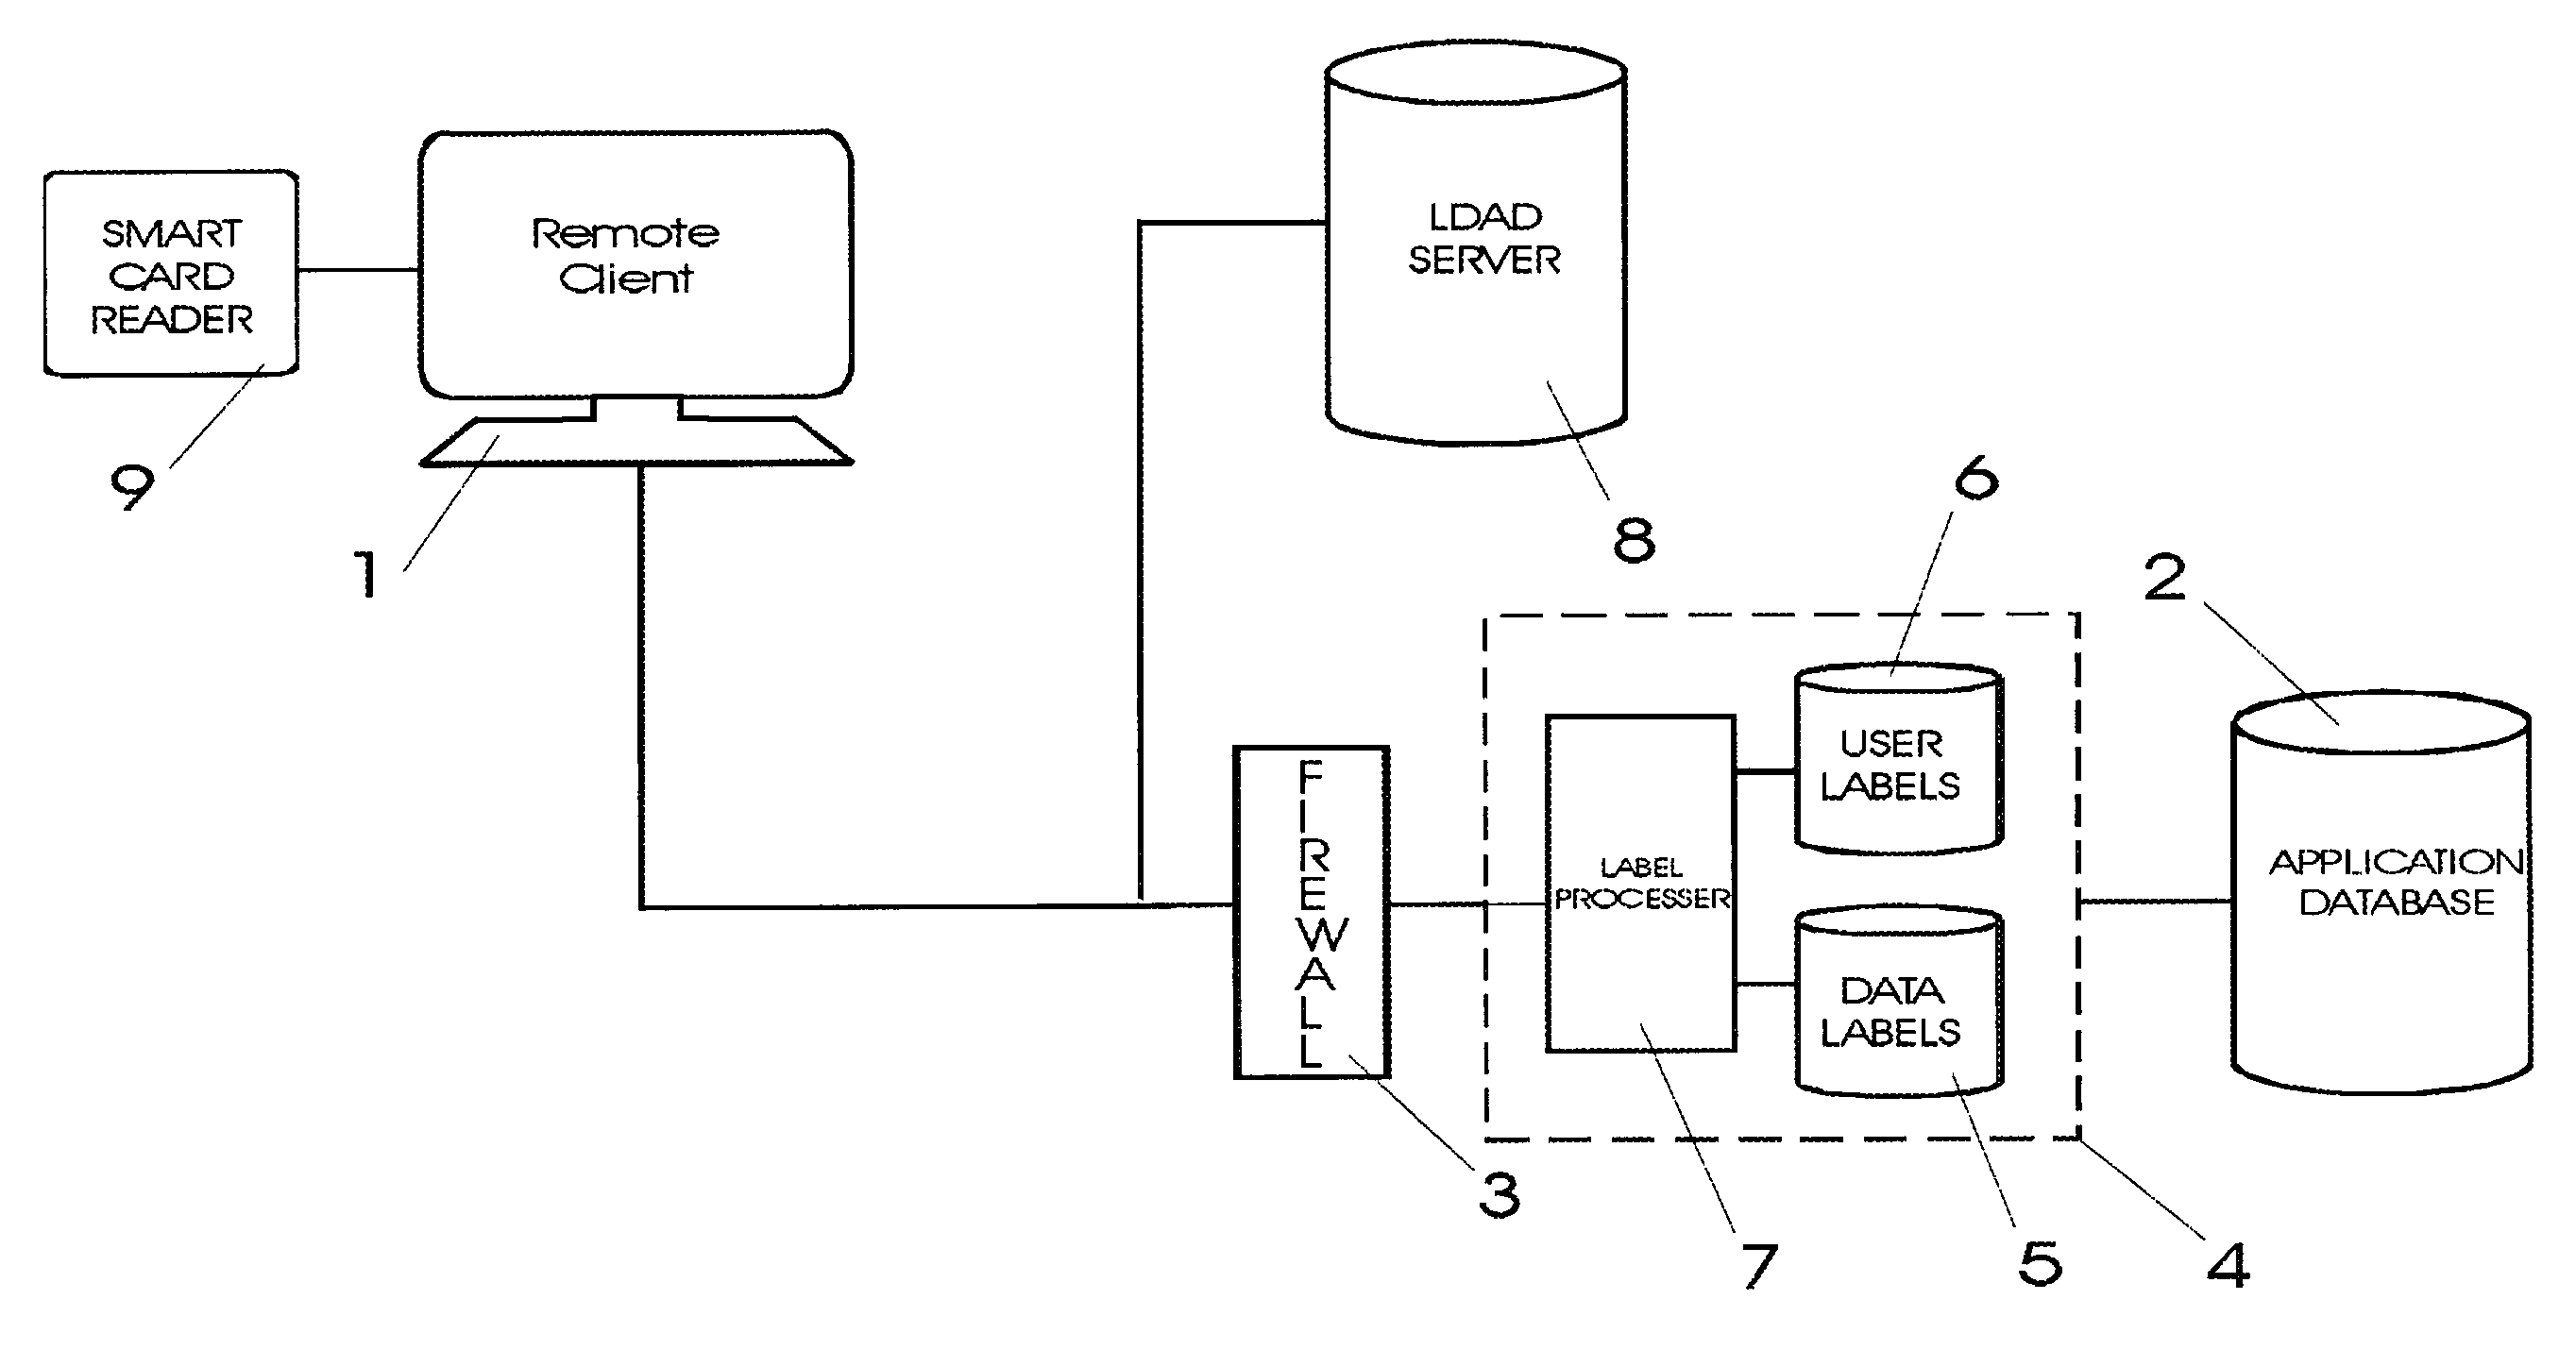 Multi-level and multi-category data labeling system